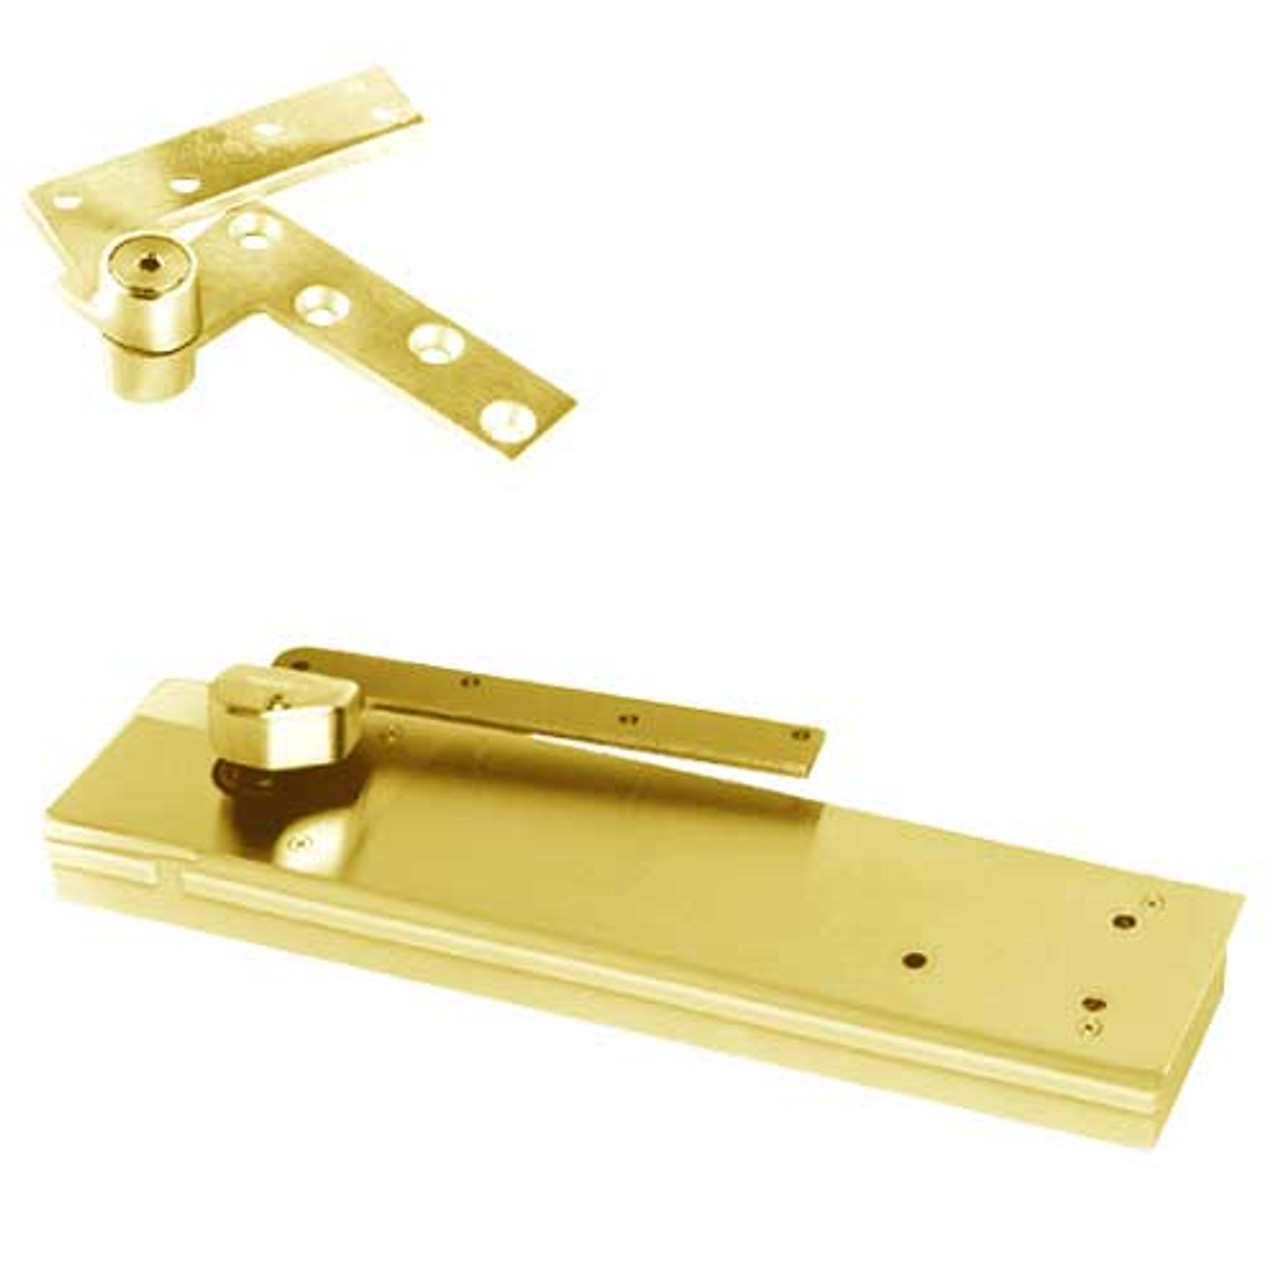 5105NBC-1-1/2OS-LFP-LCC-LH-605 Rixson 51 Series 1-1/2" Offset Hung Shallow Depth Floor Closers in Bright Brass Finish